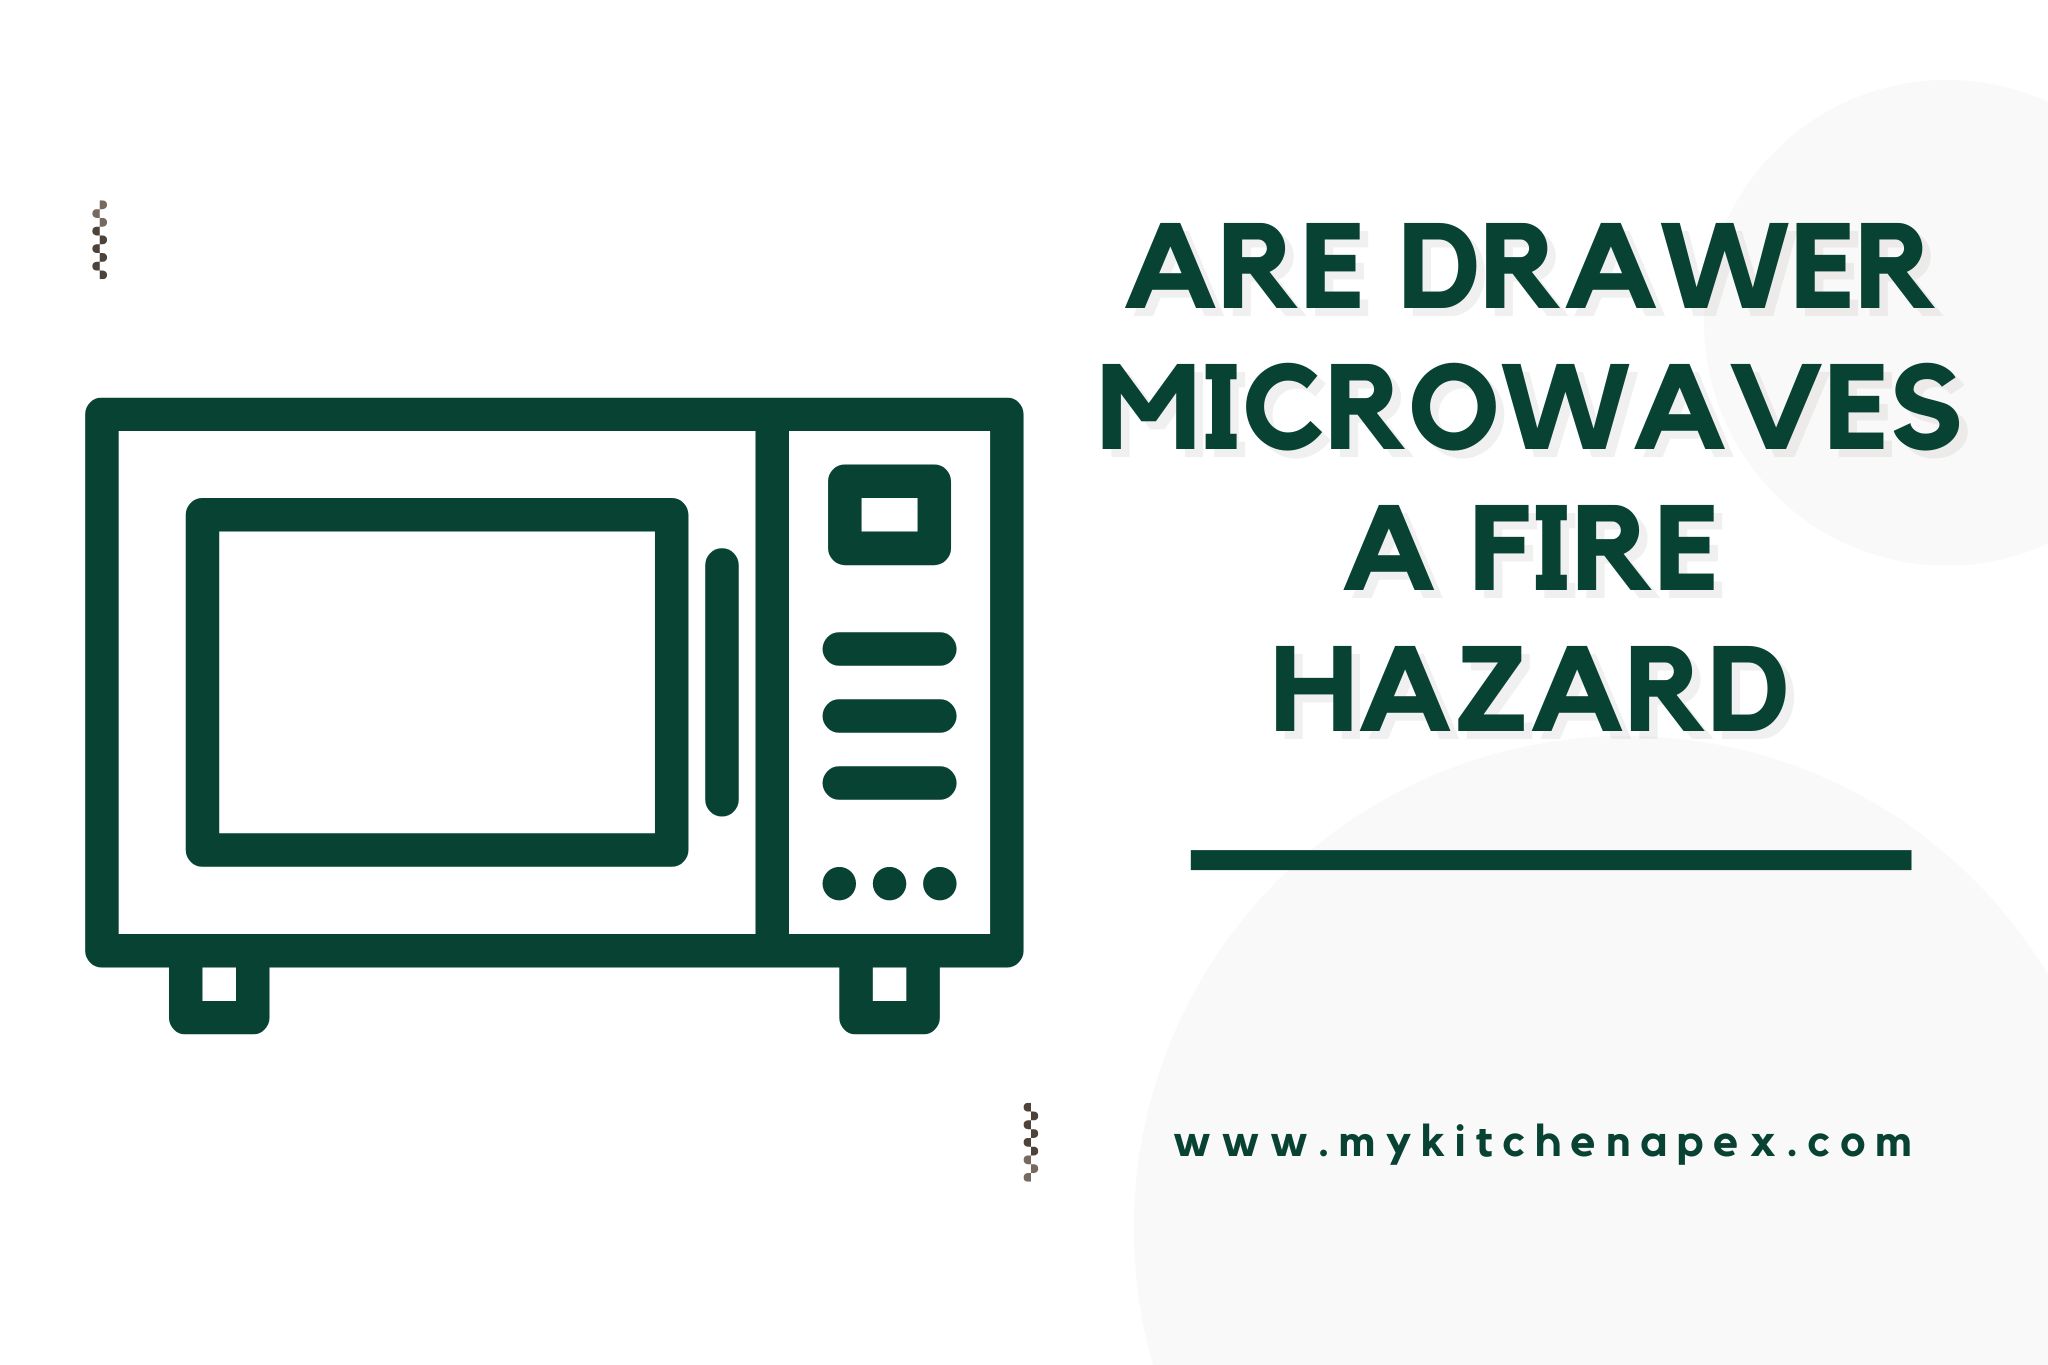 are drawer microwaves a fire hazard